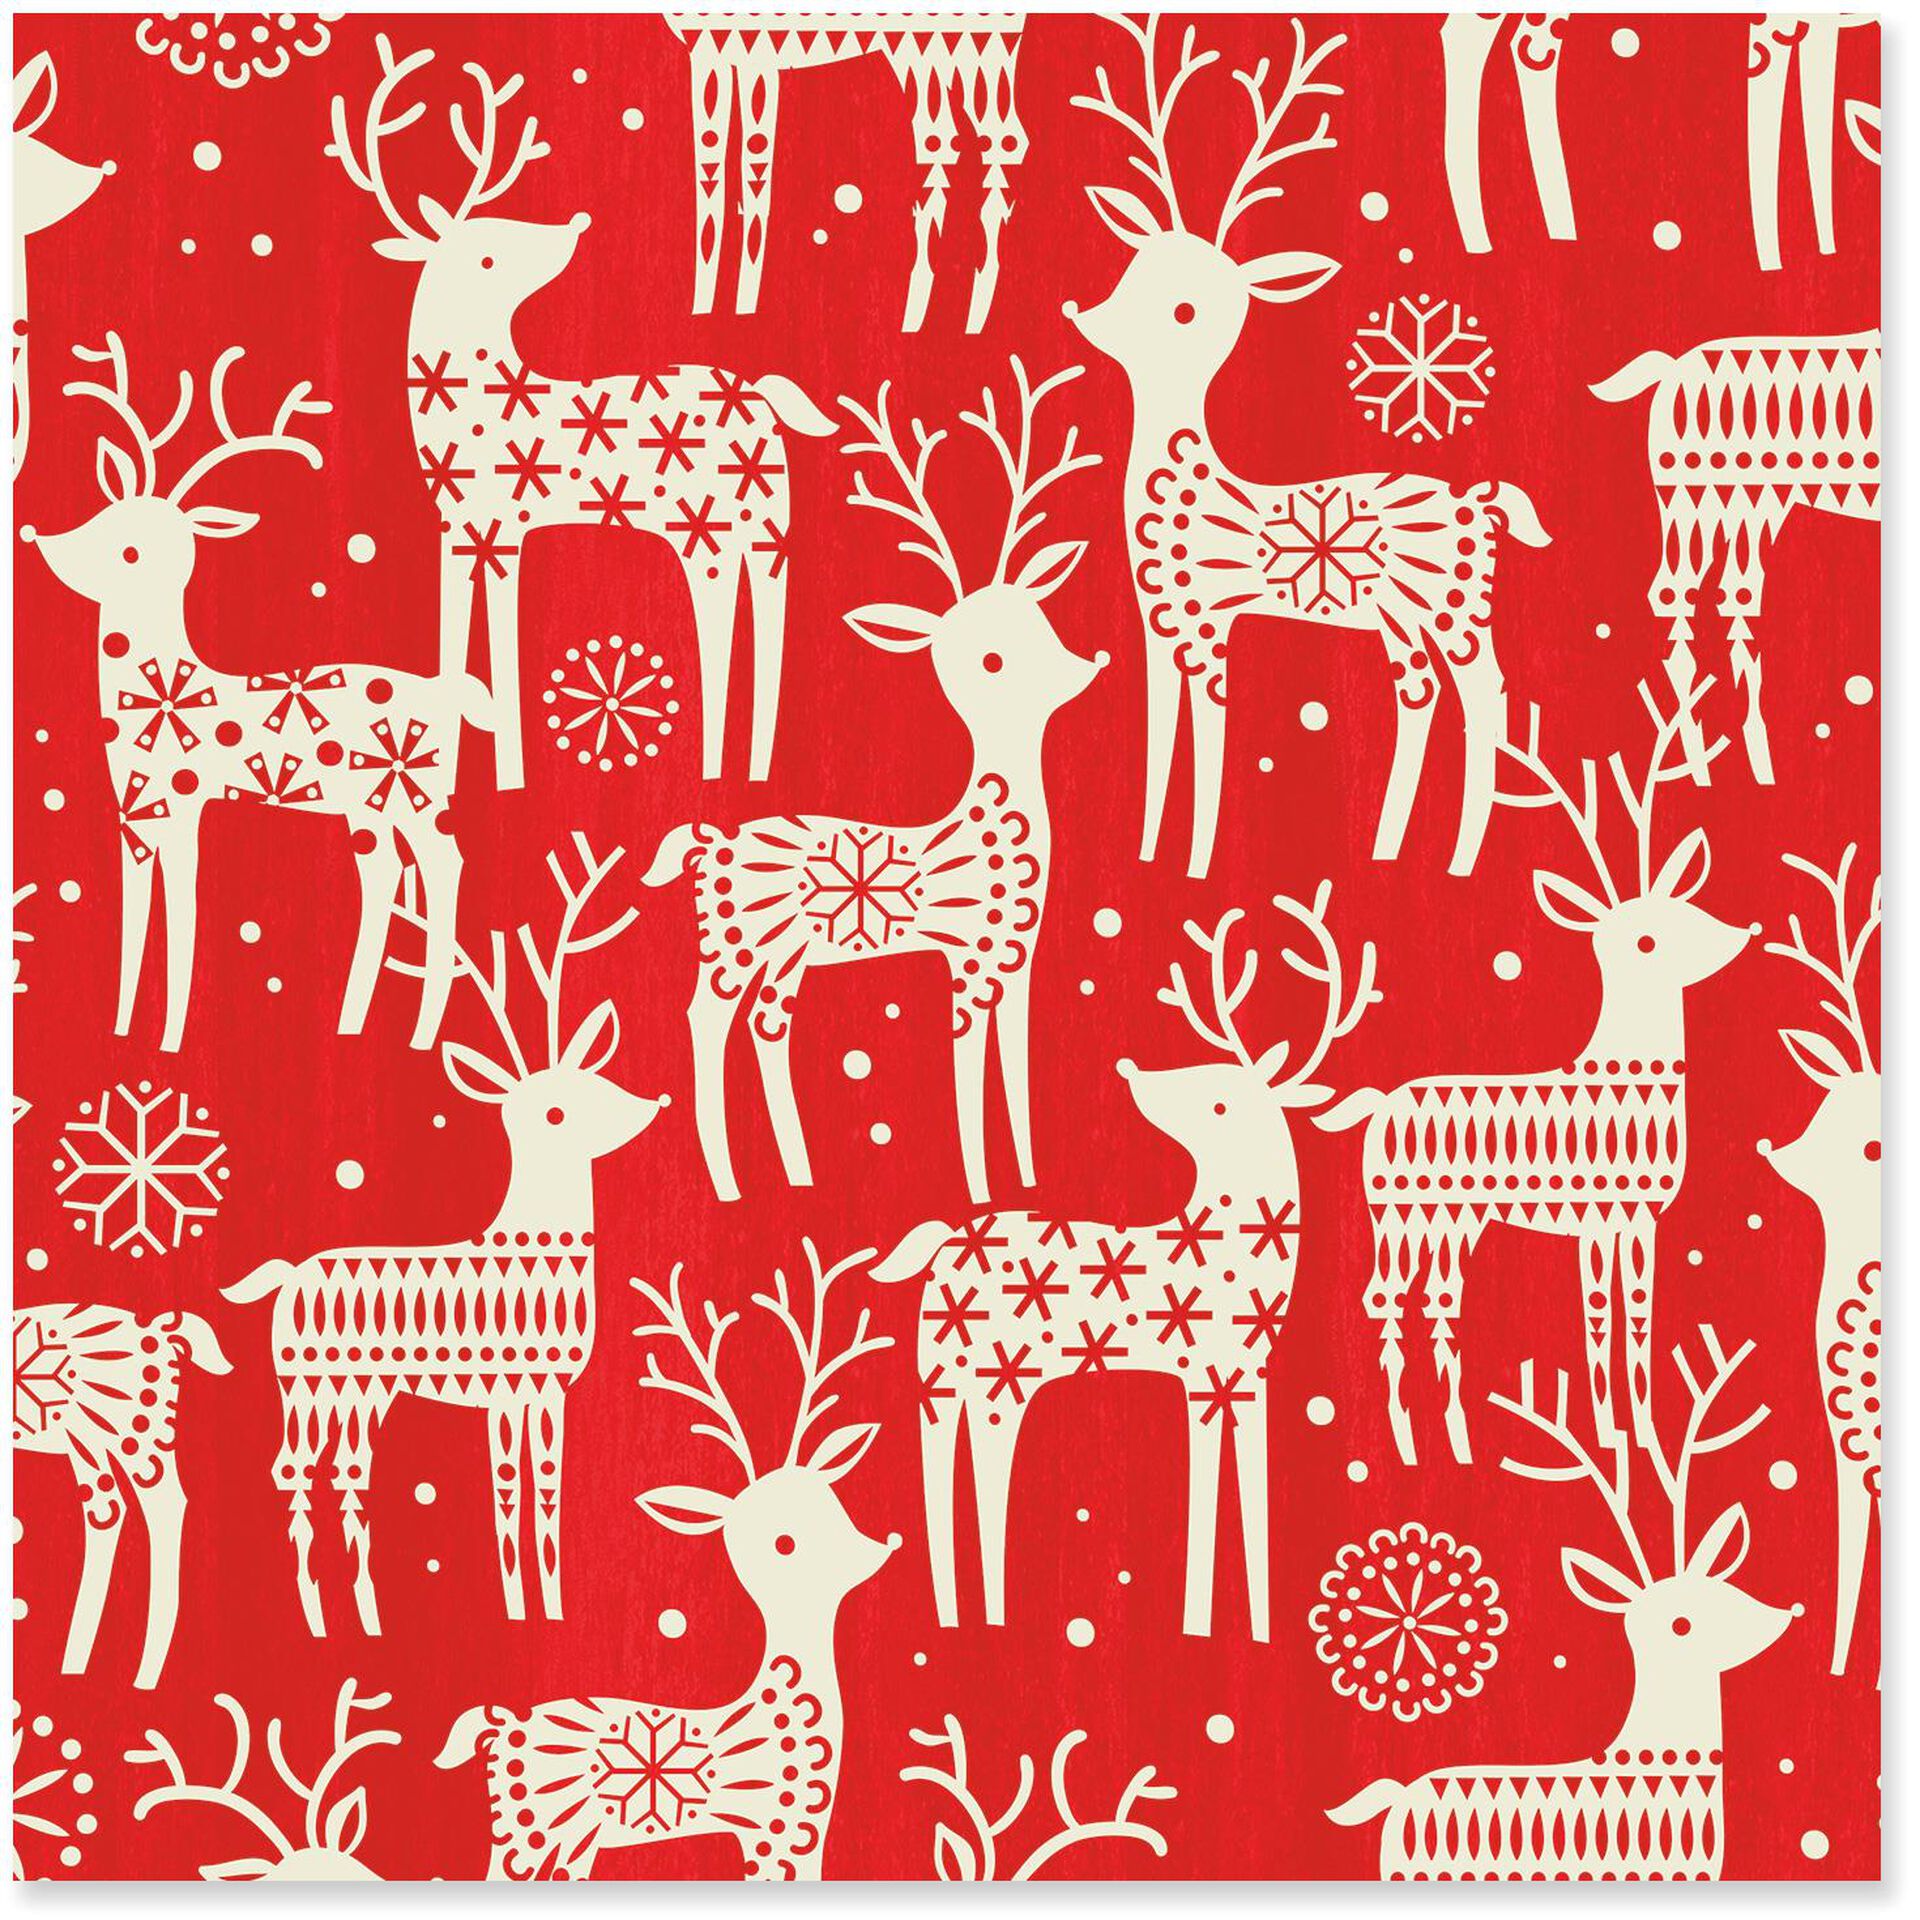 Reindeer Jumbo Christmas Wrapping Paper Roll, 100 sq. ft. - Wrapping ...